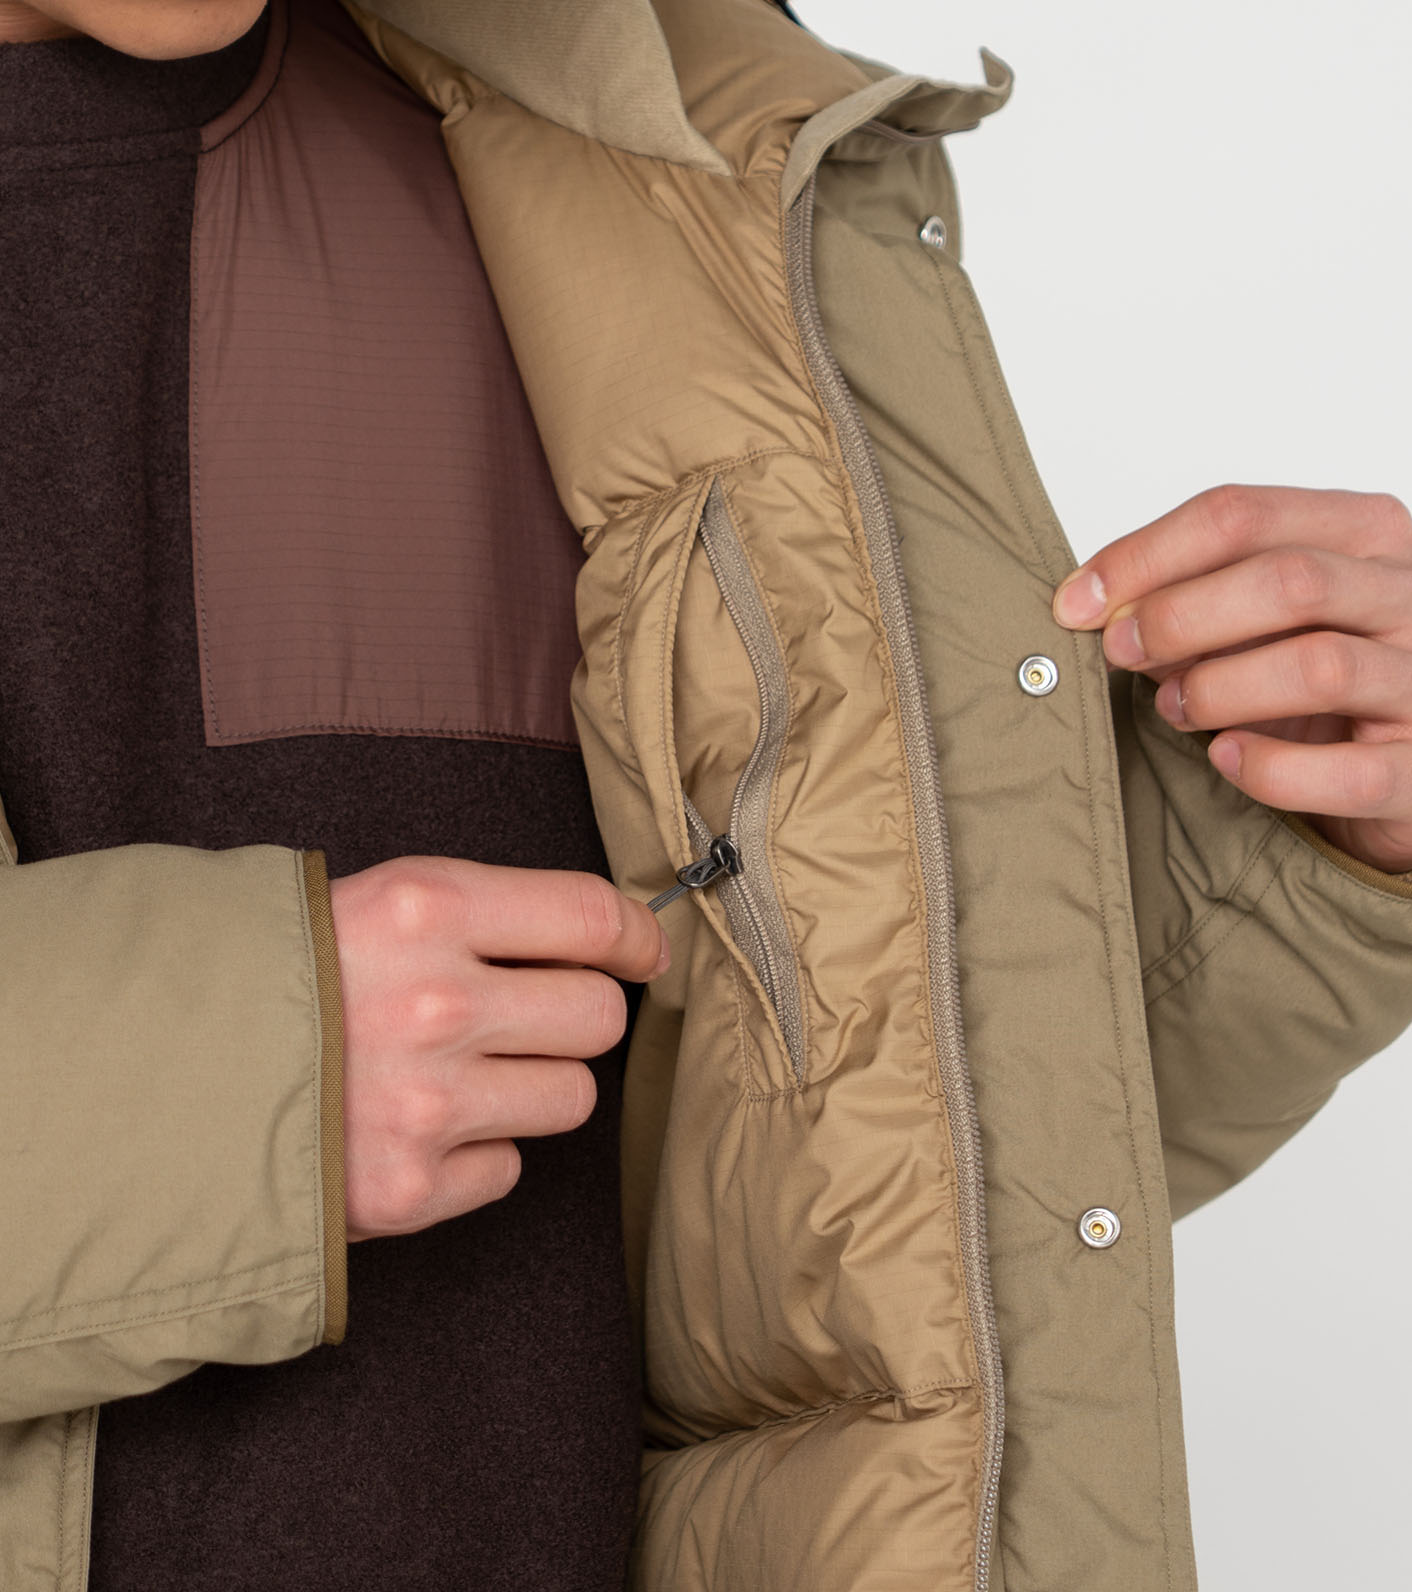 THE NORTH FACE Mountain Short Down Parka